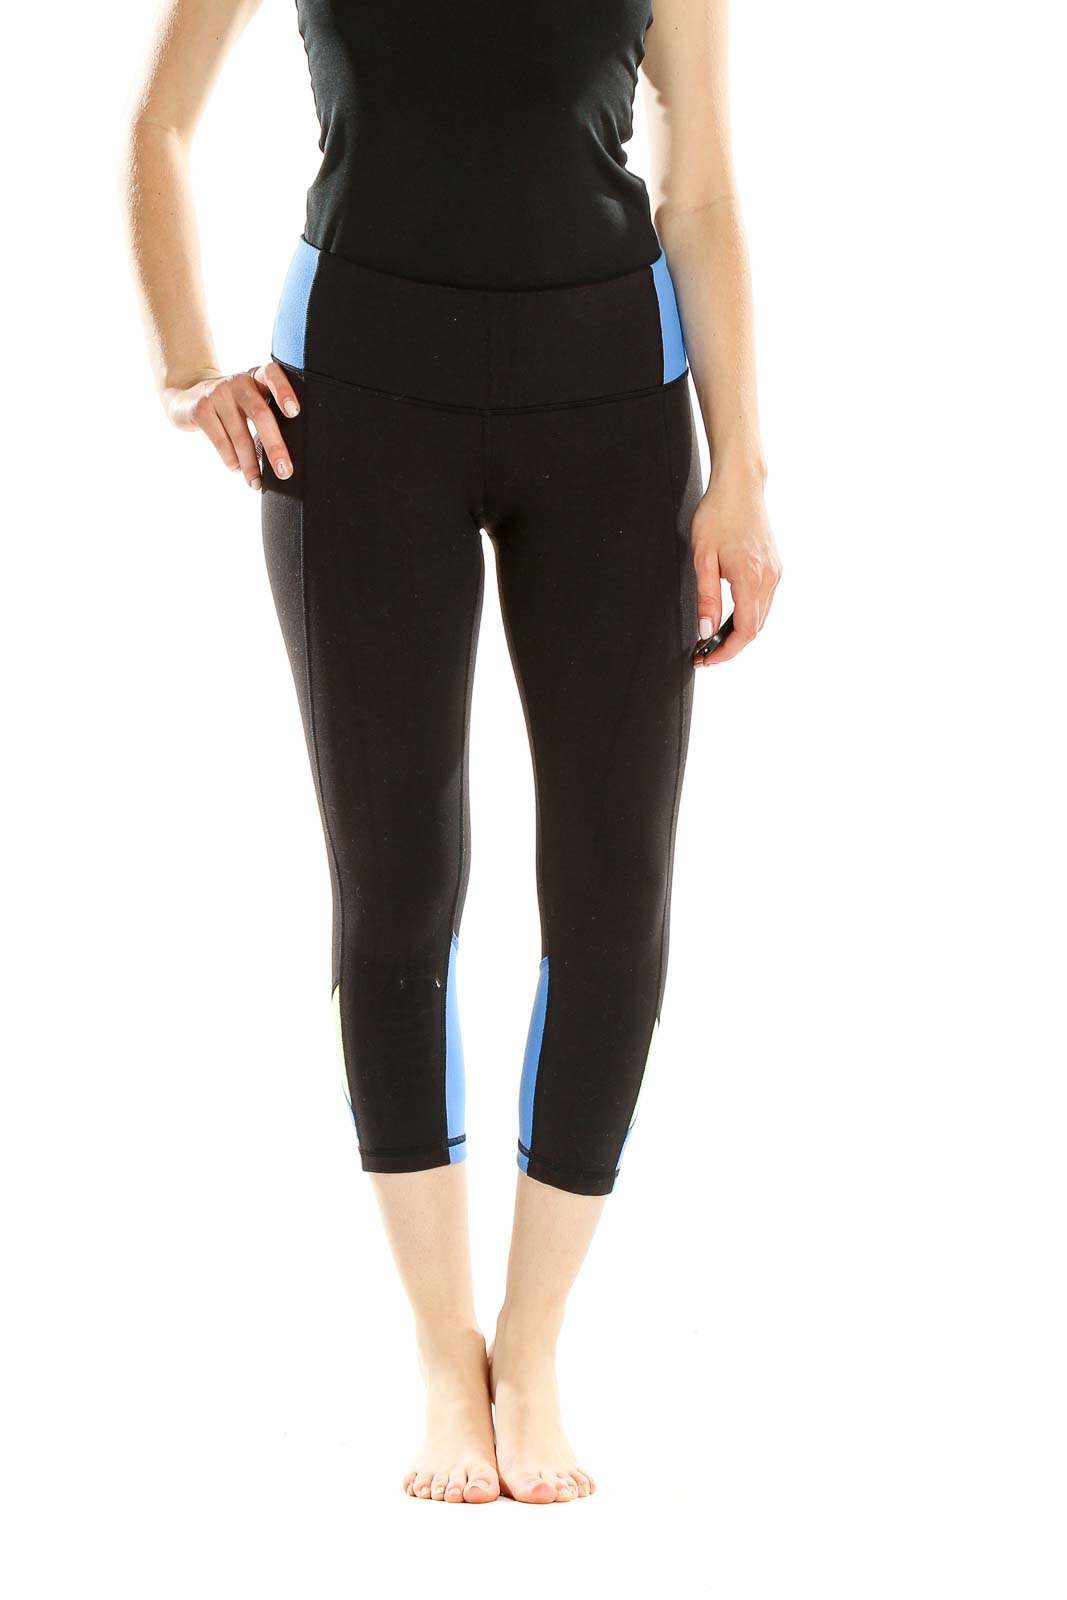 Black Colorblock Activewear Cropped Leggings Front